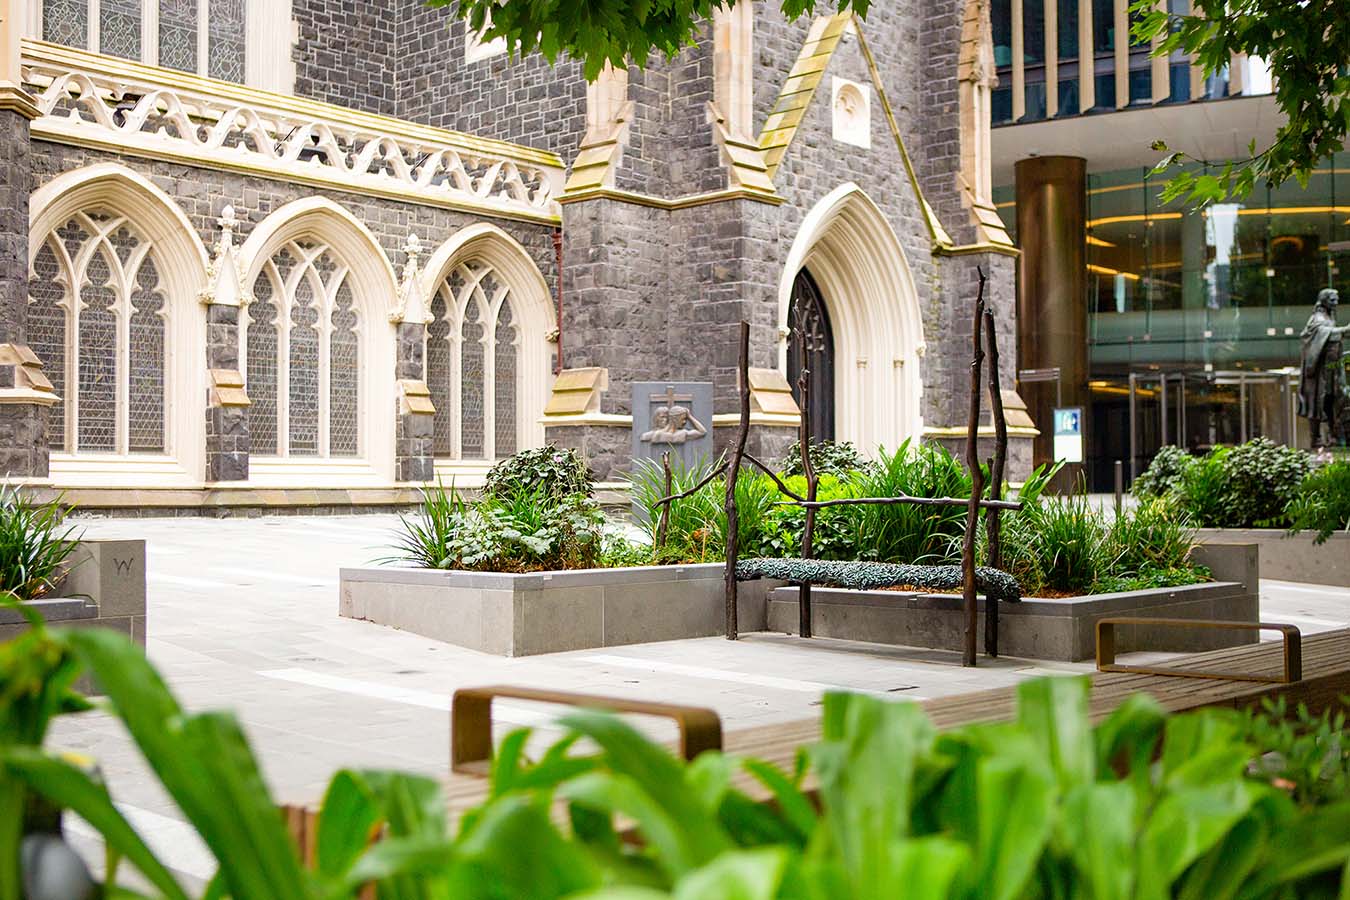 A photograph loooking through greenery to a variety of seating spaces in front of a historic bluestone church building.